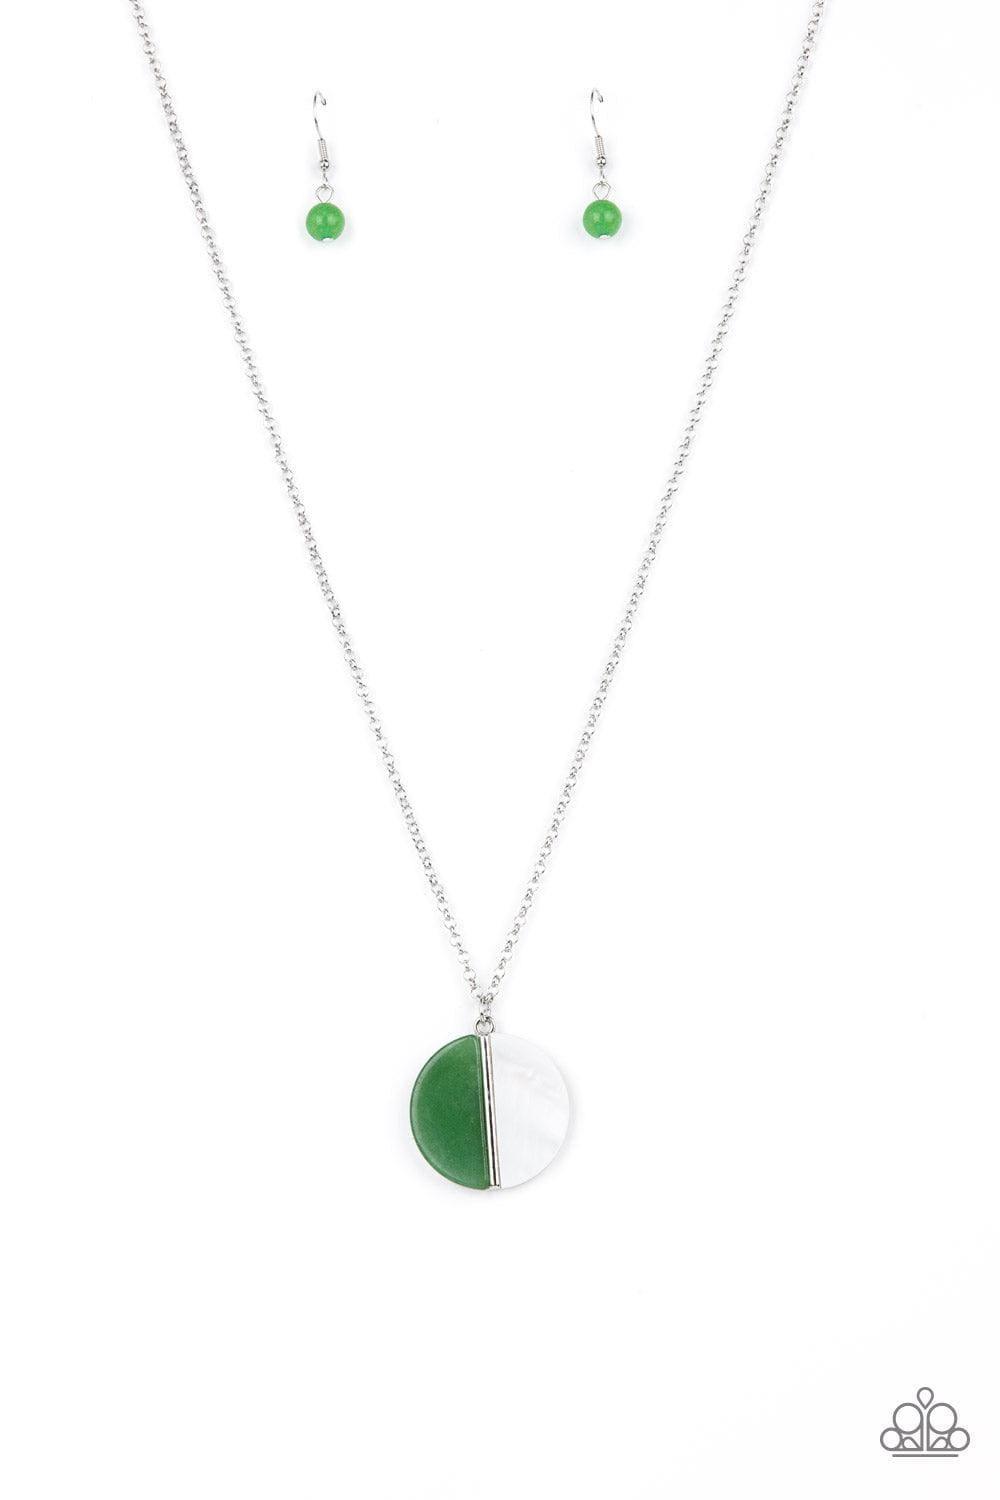 Paparazzi Accessories - Elegantly Eclipsed - Green Necklace - Bling by JessieK